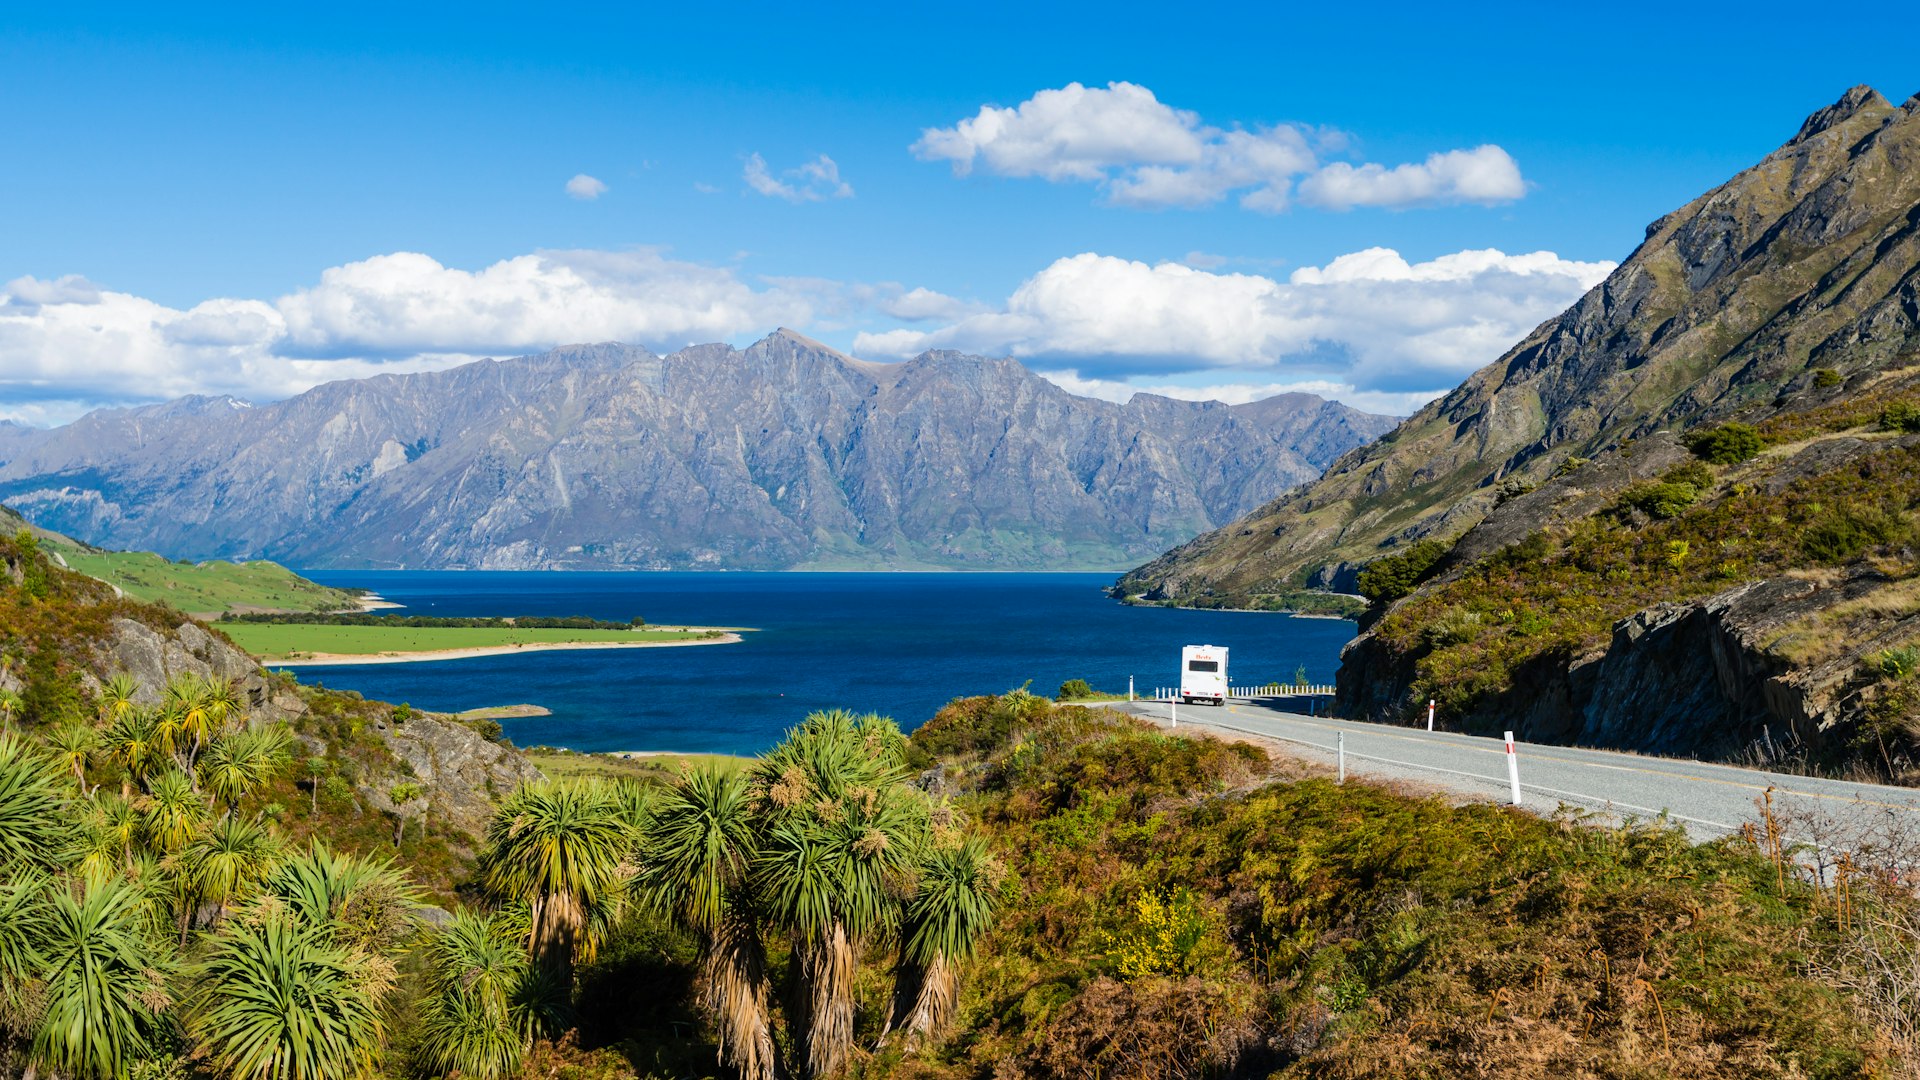 A campervan on the road in scenic New Zealand